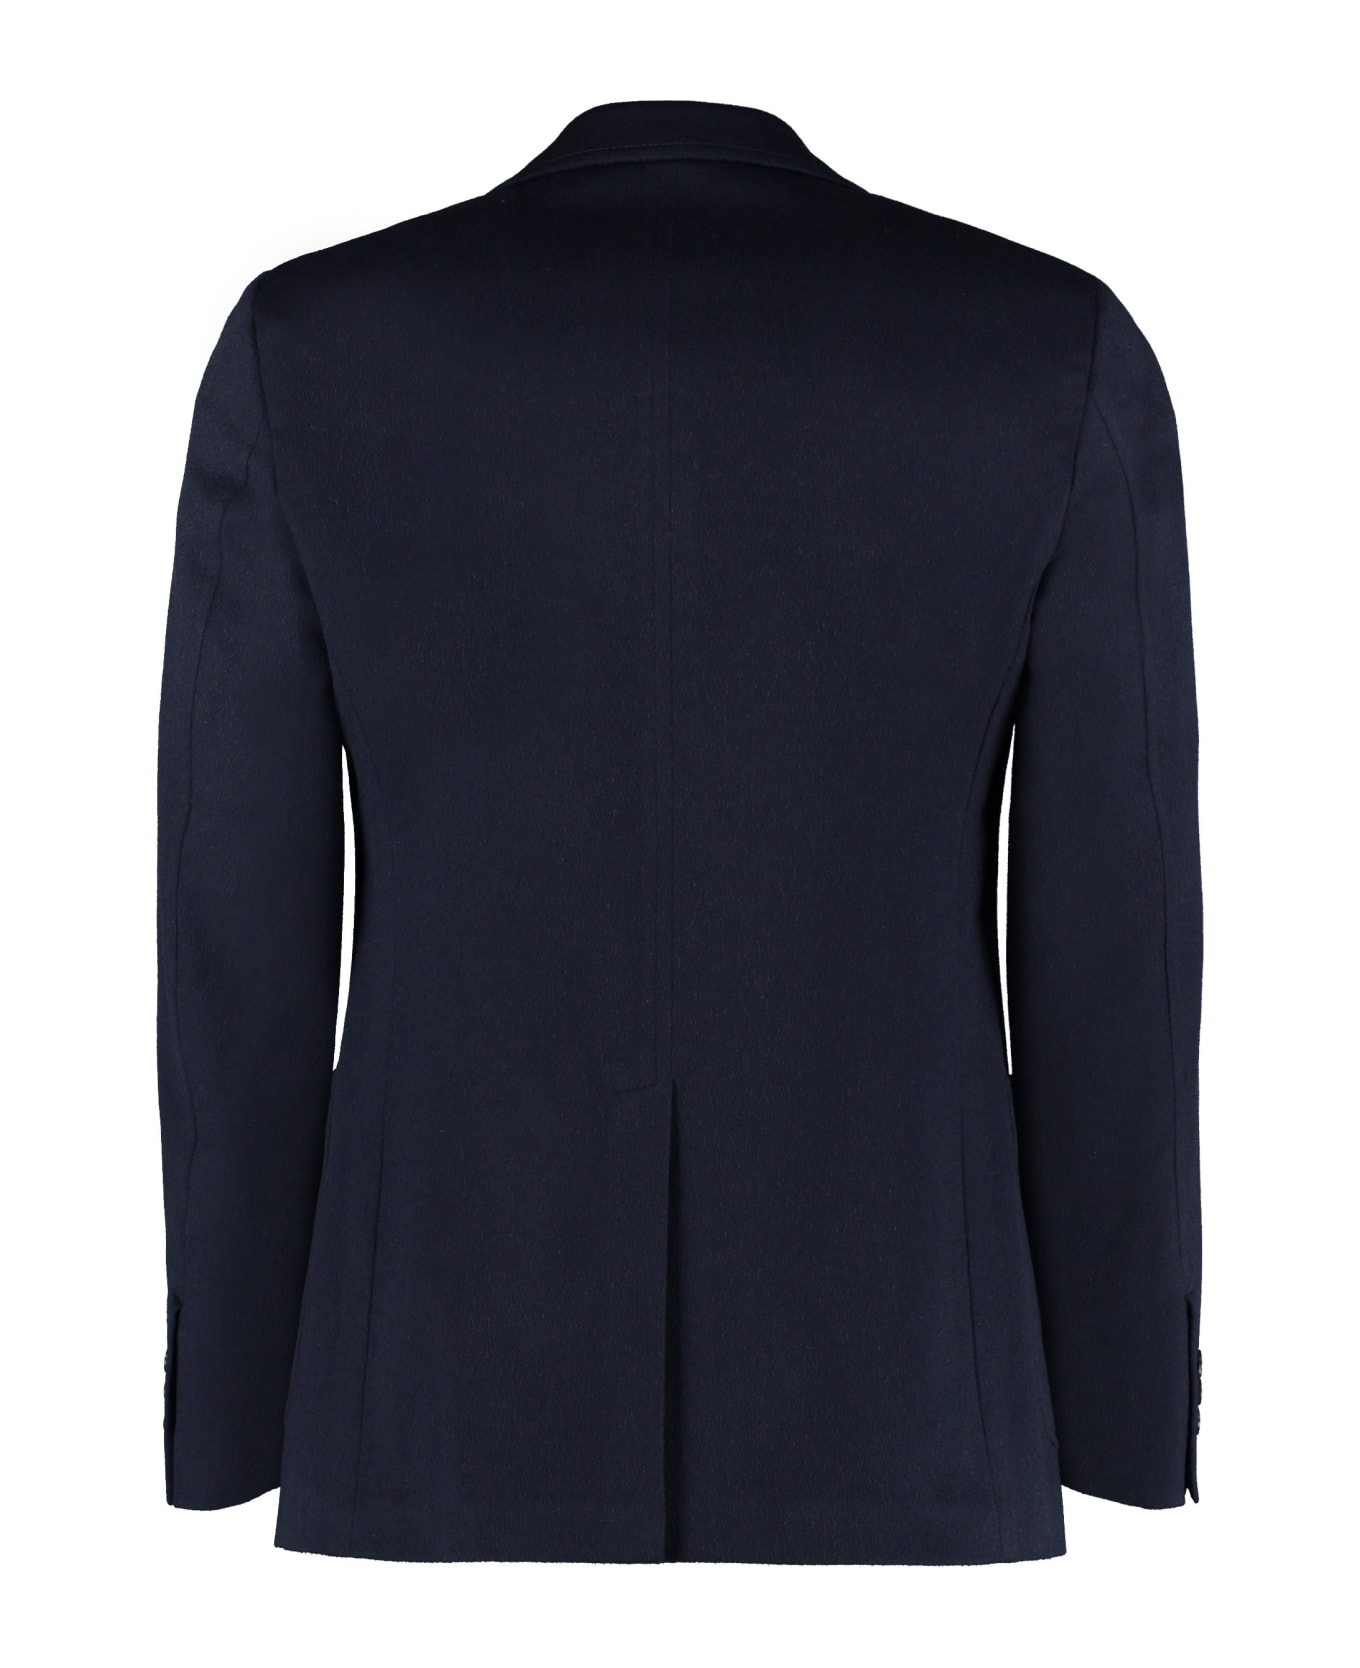 Prada Single-breasted Two-button Jacket - blue ブレザー